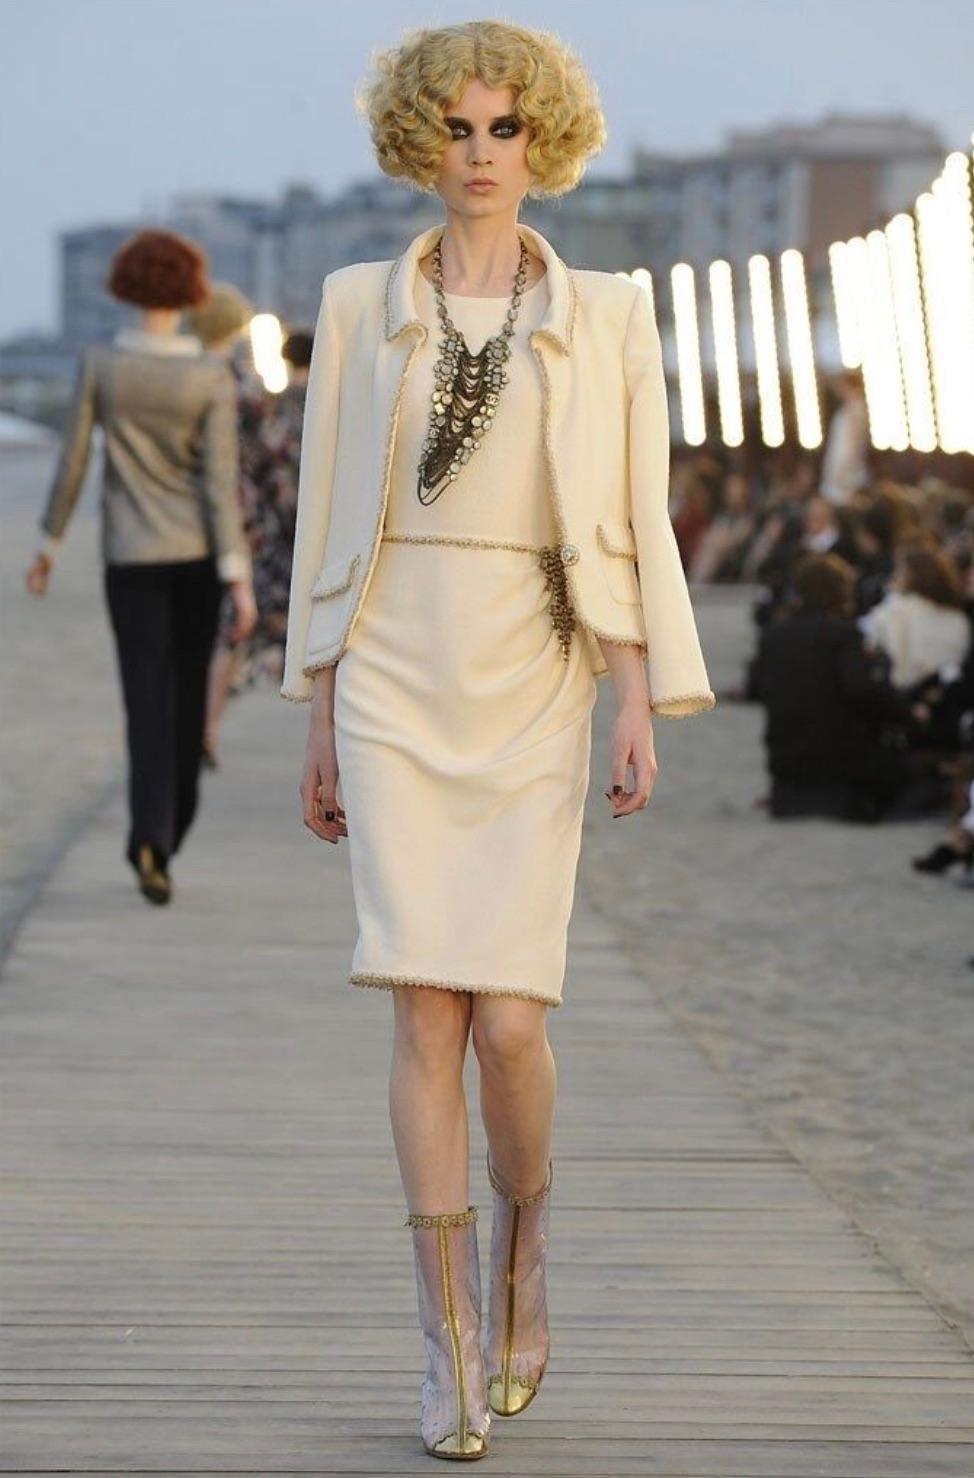 Enjoy timeless elegance with this single-breasted jacket from Chanel's Cruise 2010 collection. Crafted in luxurious ivory tweed, its tailored silhouette with a notched lapel collar showcases impeccable craftsmanship. Adorned with the signature gold